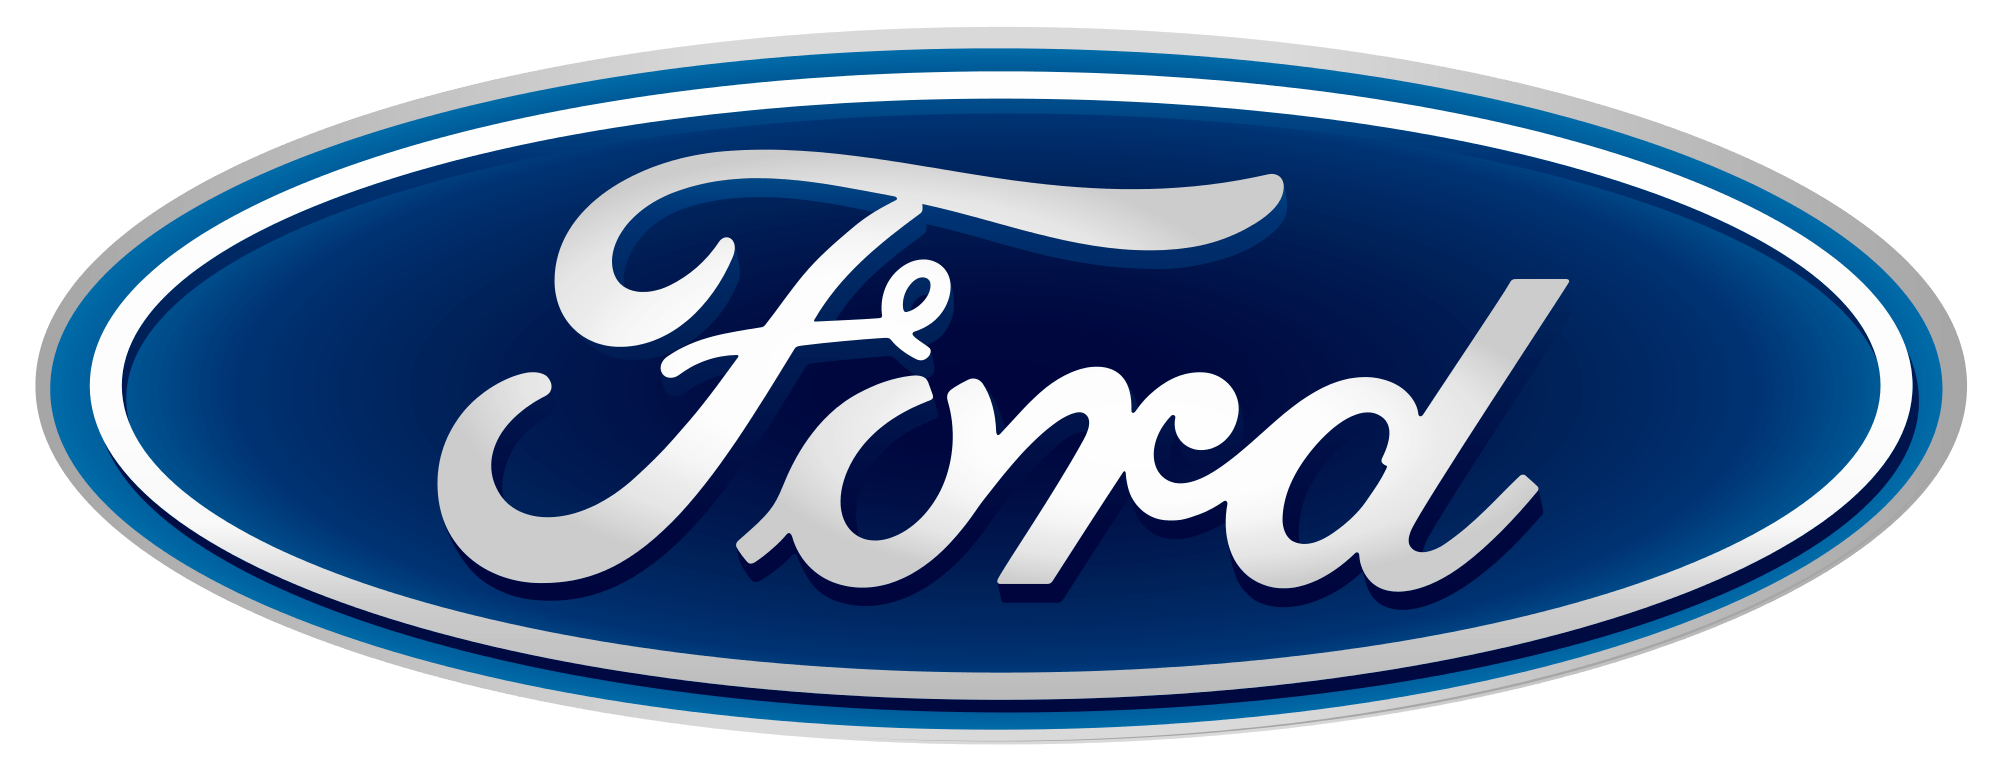 2017 Ford Logo - Recalls Cost Ford During First Quarter 2017